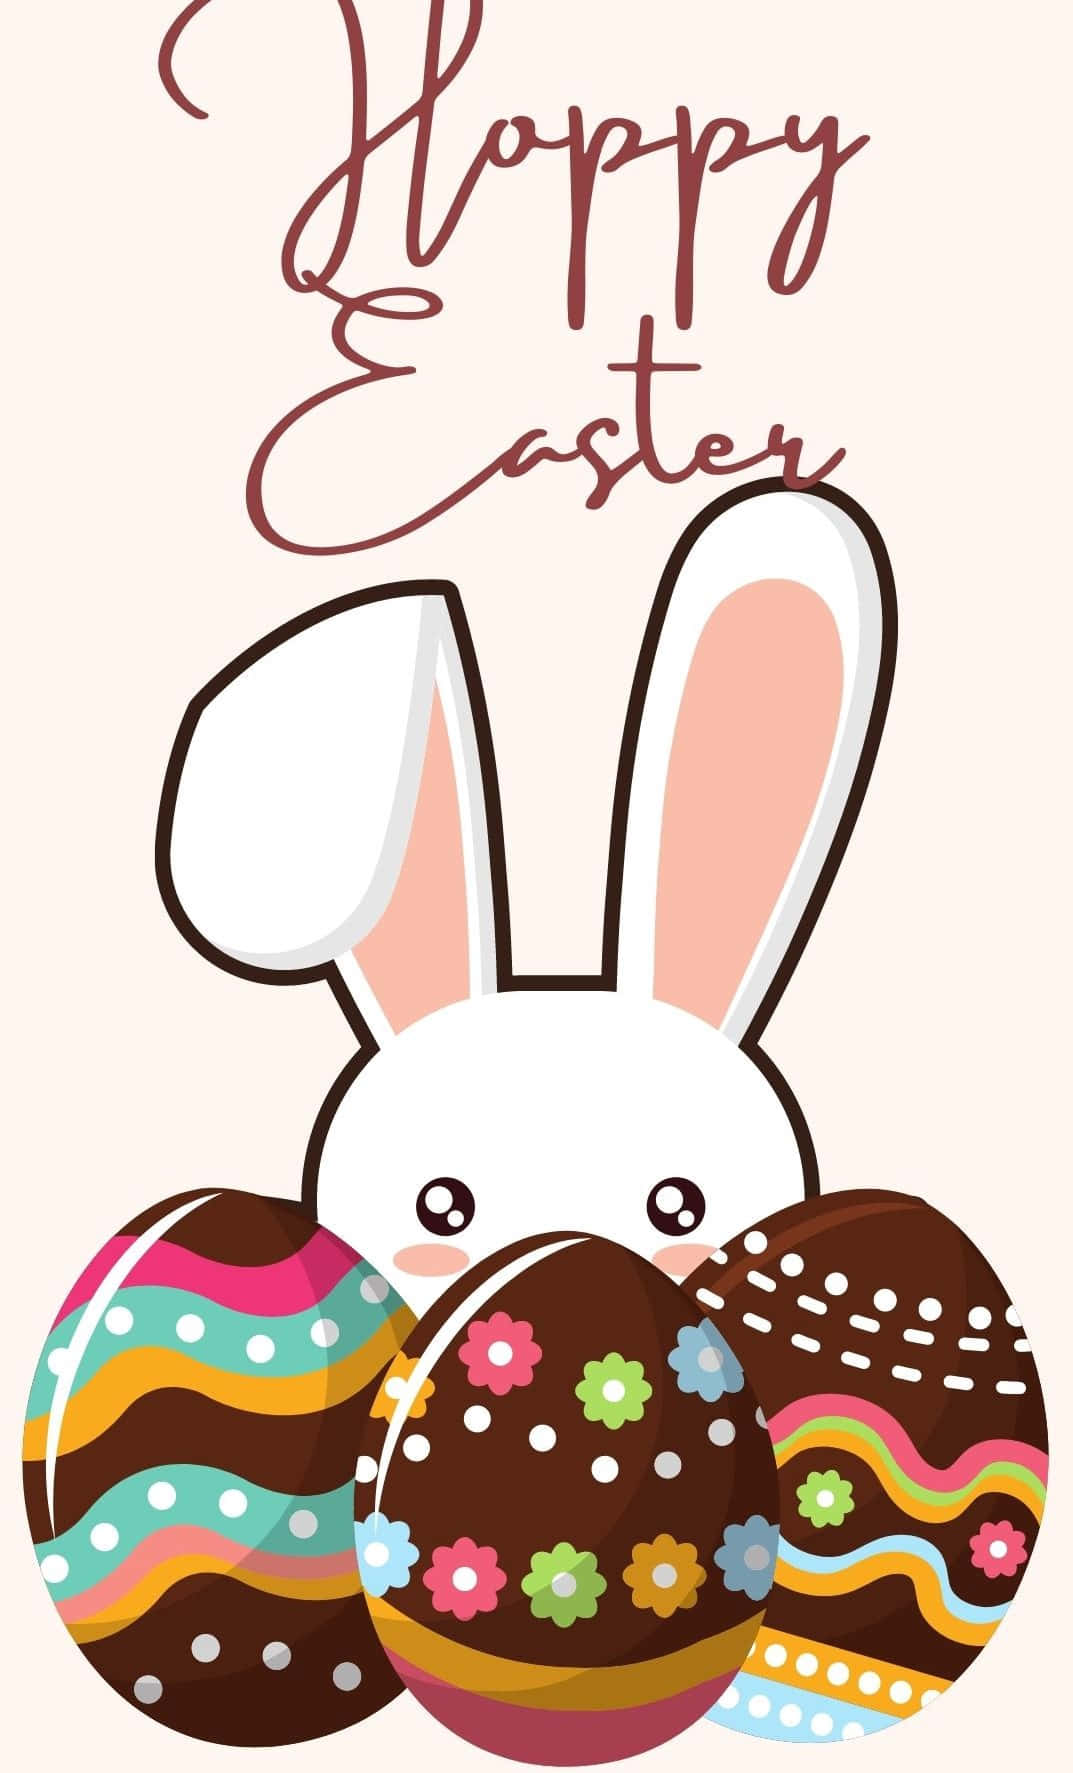 A cute Easter-themed iPhone wallpaper, decorated with cute Easter eggs and bunnies! Wallpaper